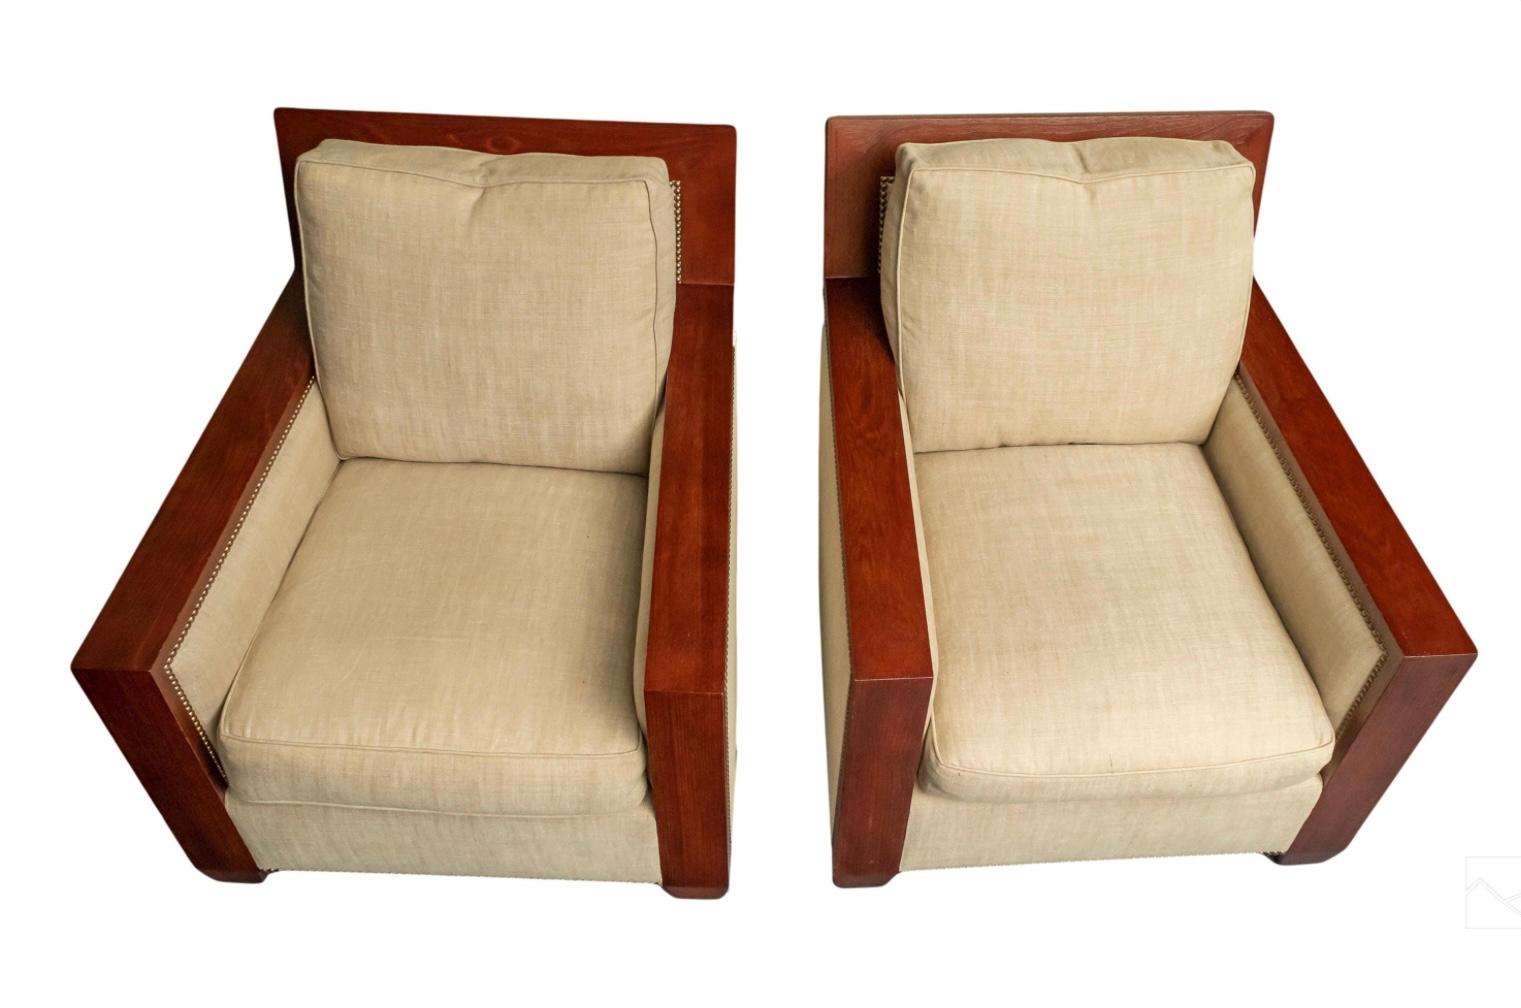 Exquisite Pair of designer armchairs designed by John Hutton (1947-2006) for the Sutherland Collection (Dallas). Art Deco Moderne inspired lounge chairs produced with dark finished wood frames fitted with cream fabric linen upholstered seats and